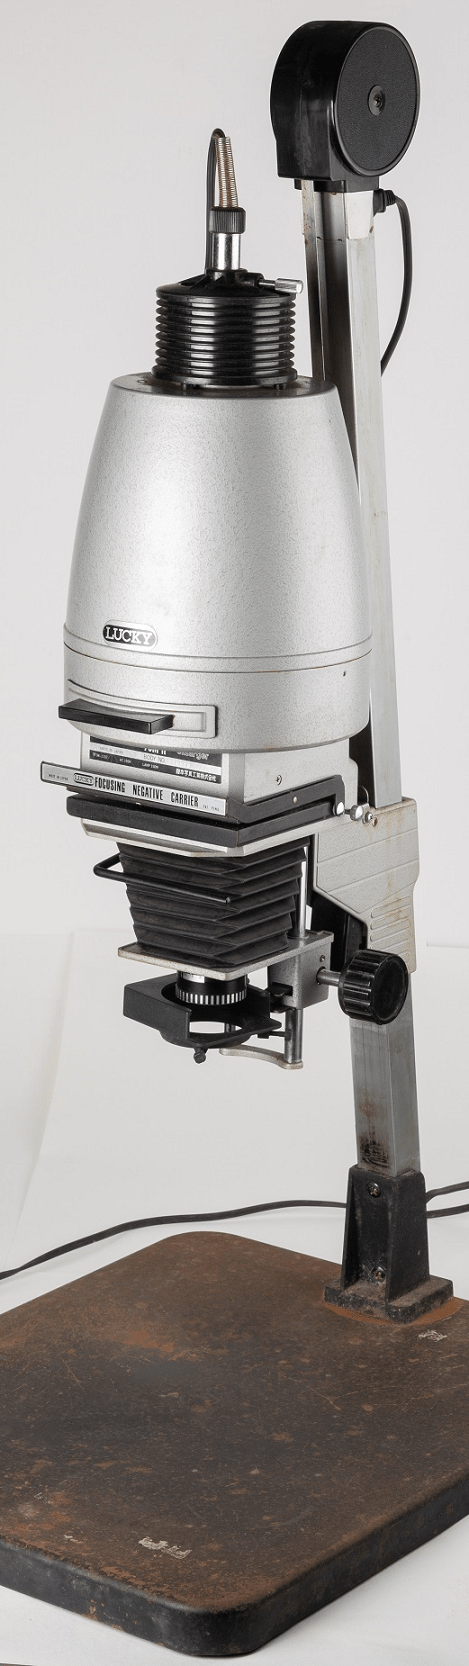 An enlarger for the production of ID card photographs. (c.1970s) Courtesy of the Immigration Department